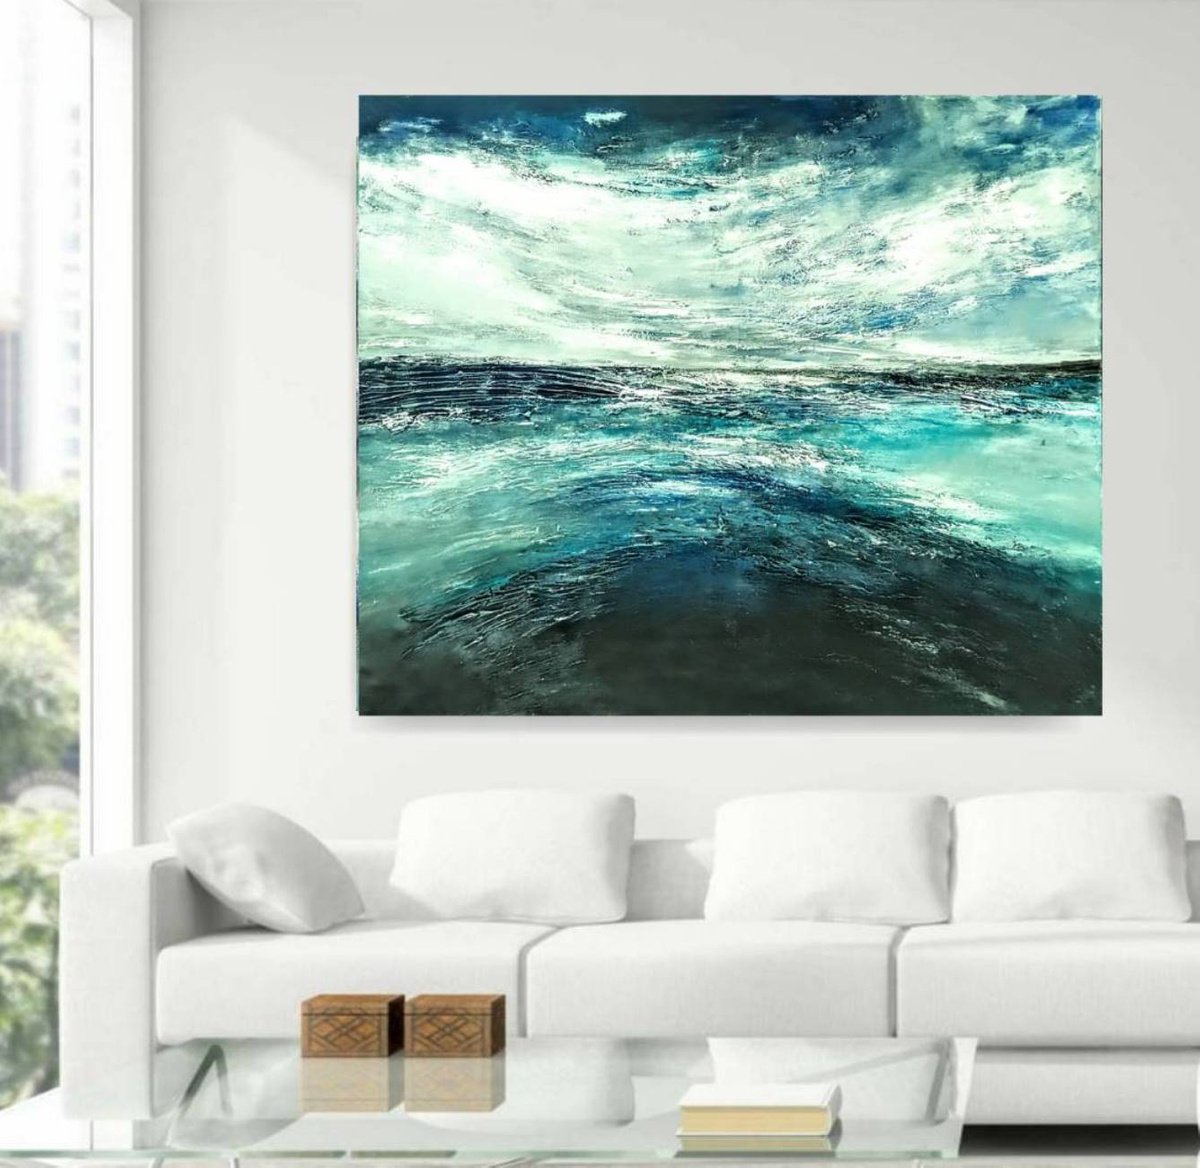 Kefalonia 120x100cm Abstract Textured Painting by Alexandra Petropoulou